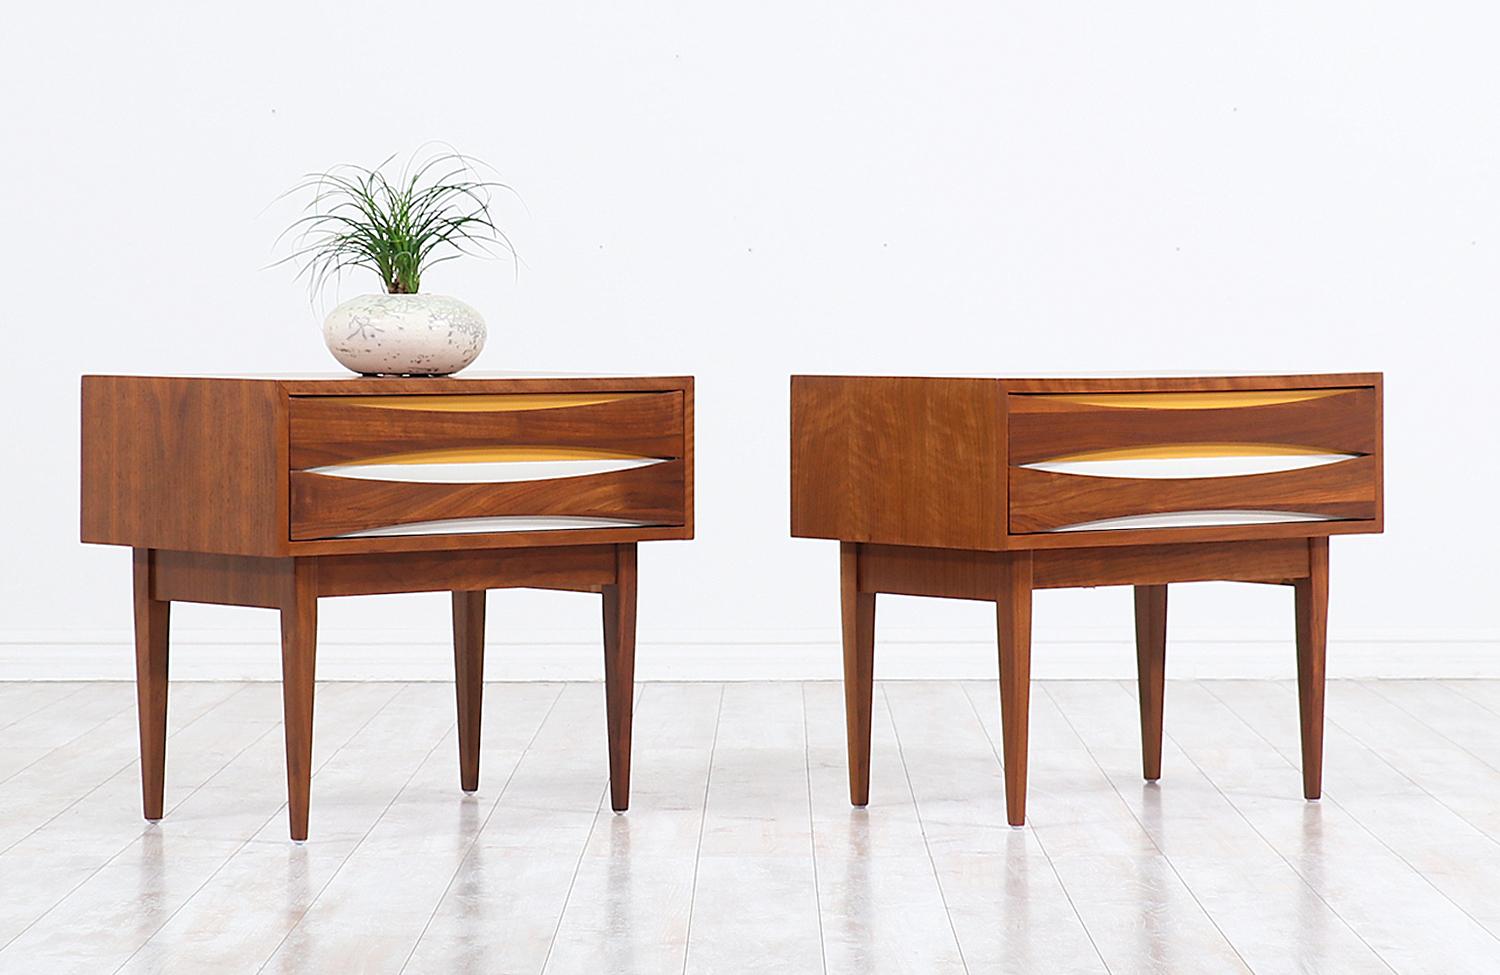 American Mid-Century Modern Nightstands with Lacquered Bowtie Style Drawers